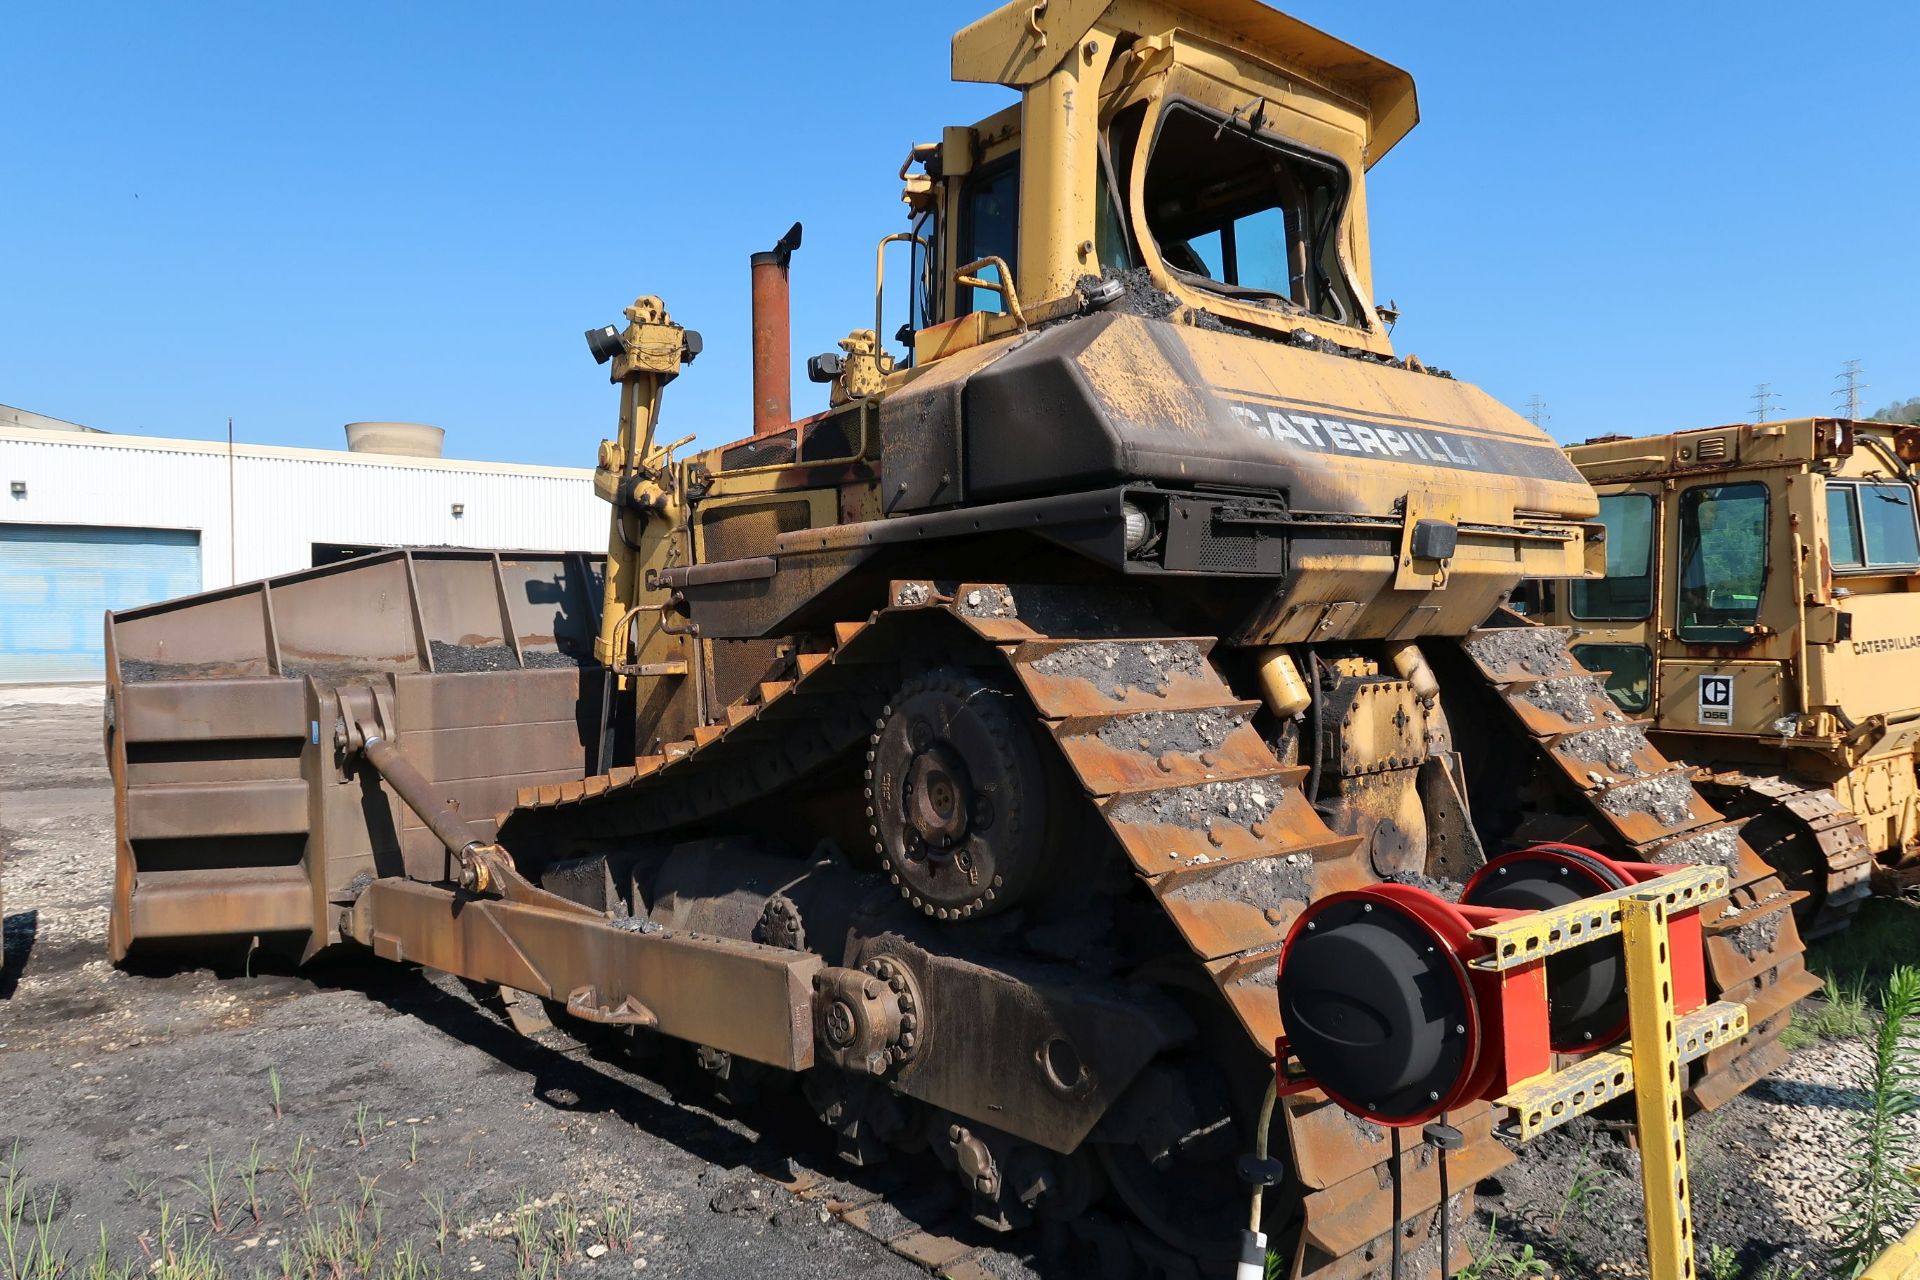 CATERPILLAR MODEL D9N CRAWLER DOZER; S/N 1JD02281, ROPS CANOPY, CAB, 26,102 HOURS SHOWING, NOTED - Image 4 of 11